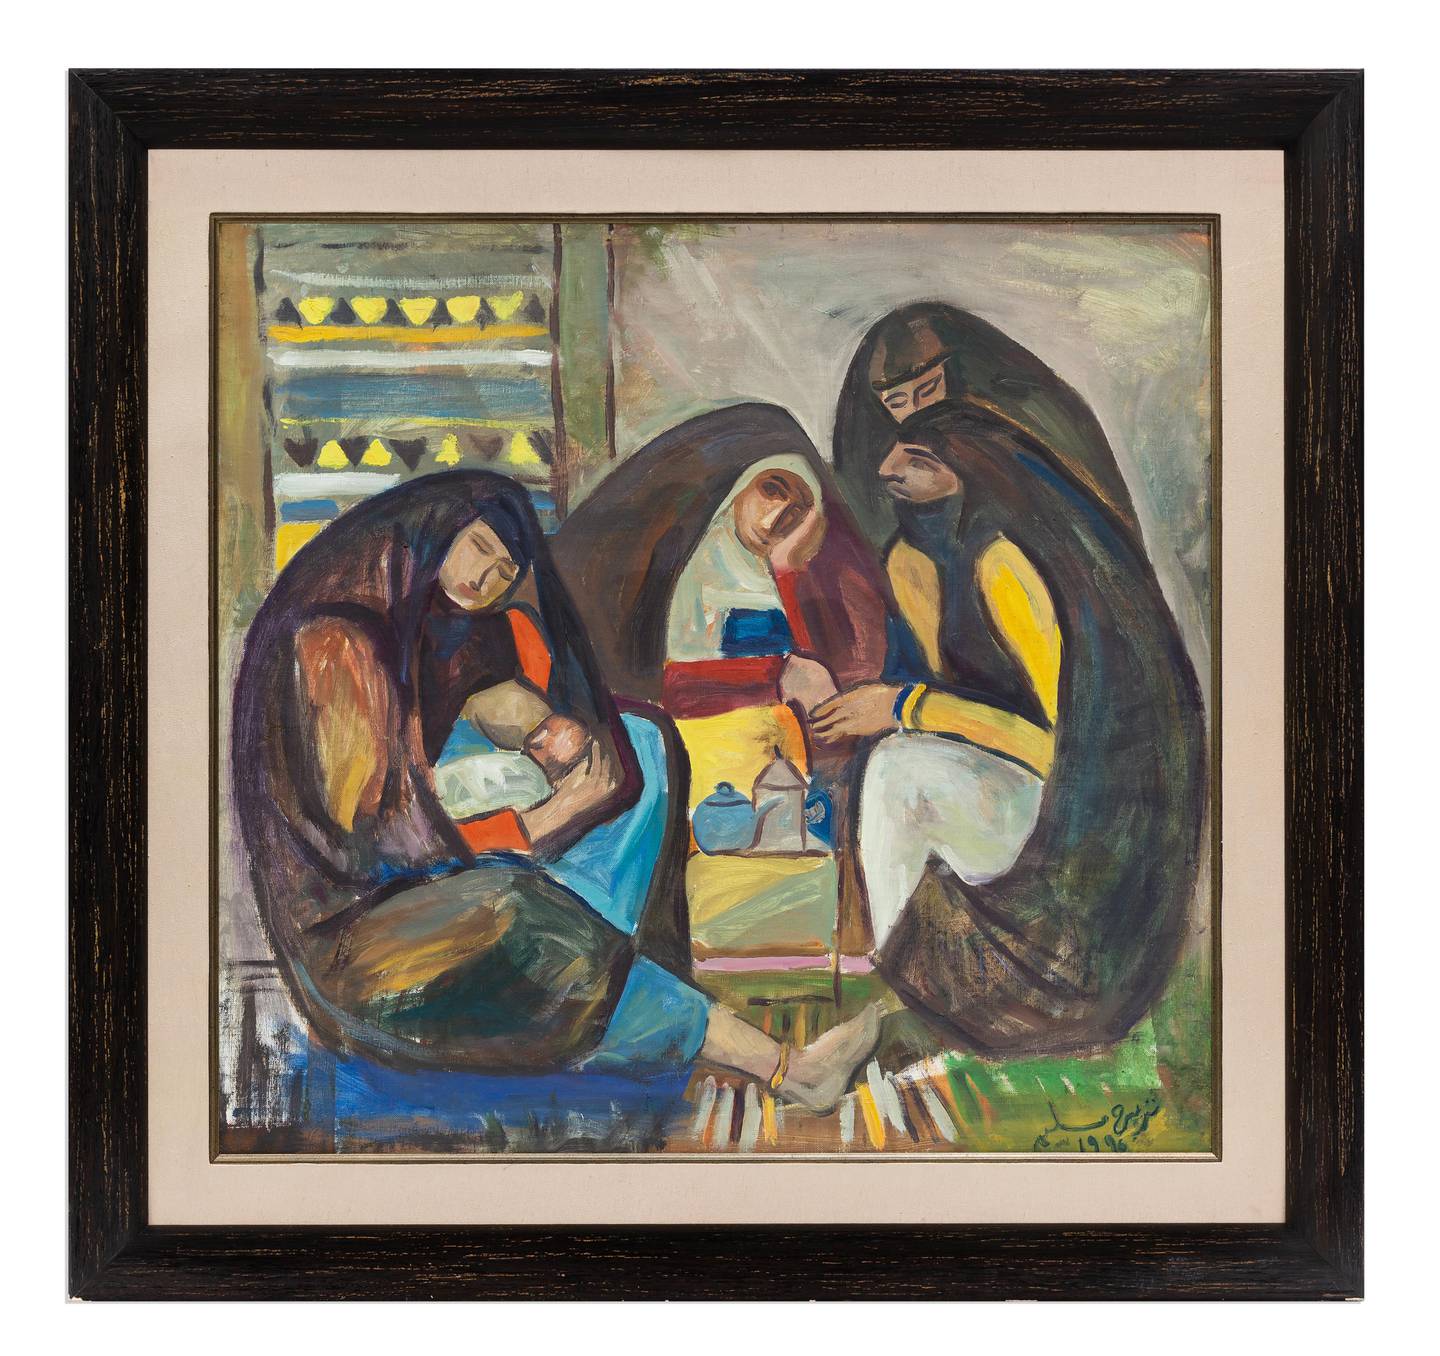 Untitled, 1996, oil on canvas by Naziha Selim, from the private collection of Sheikh Mohammed bin Rashid, Vice President and Ruler of Dubai. Photo: Ismail Noor